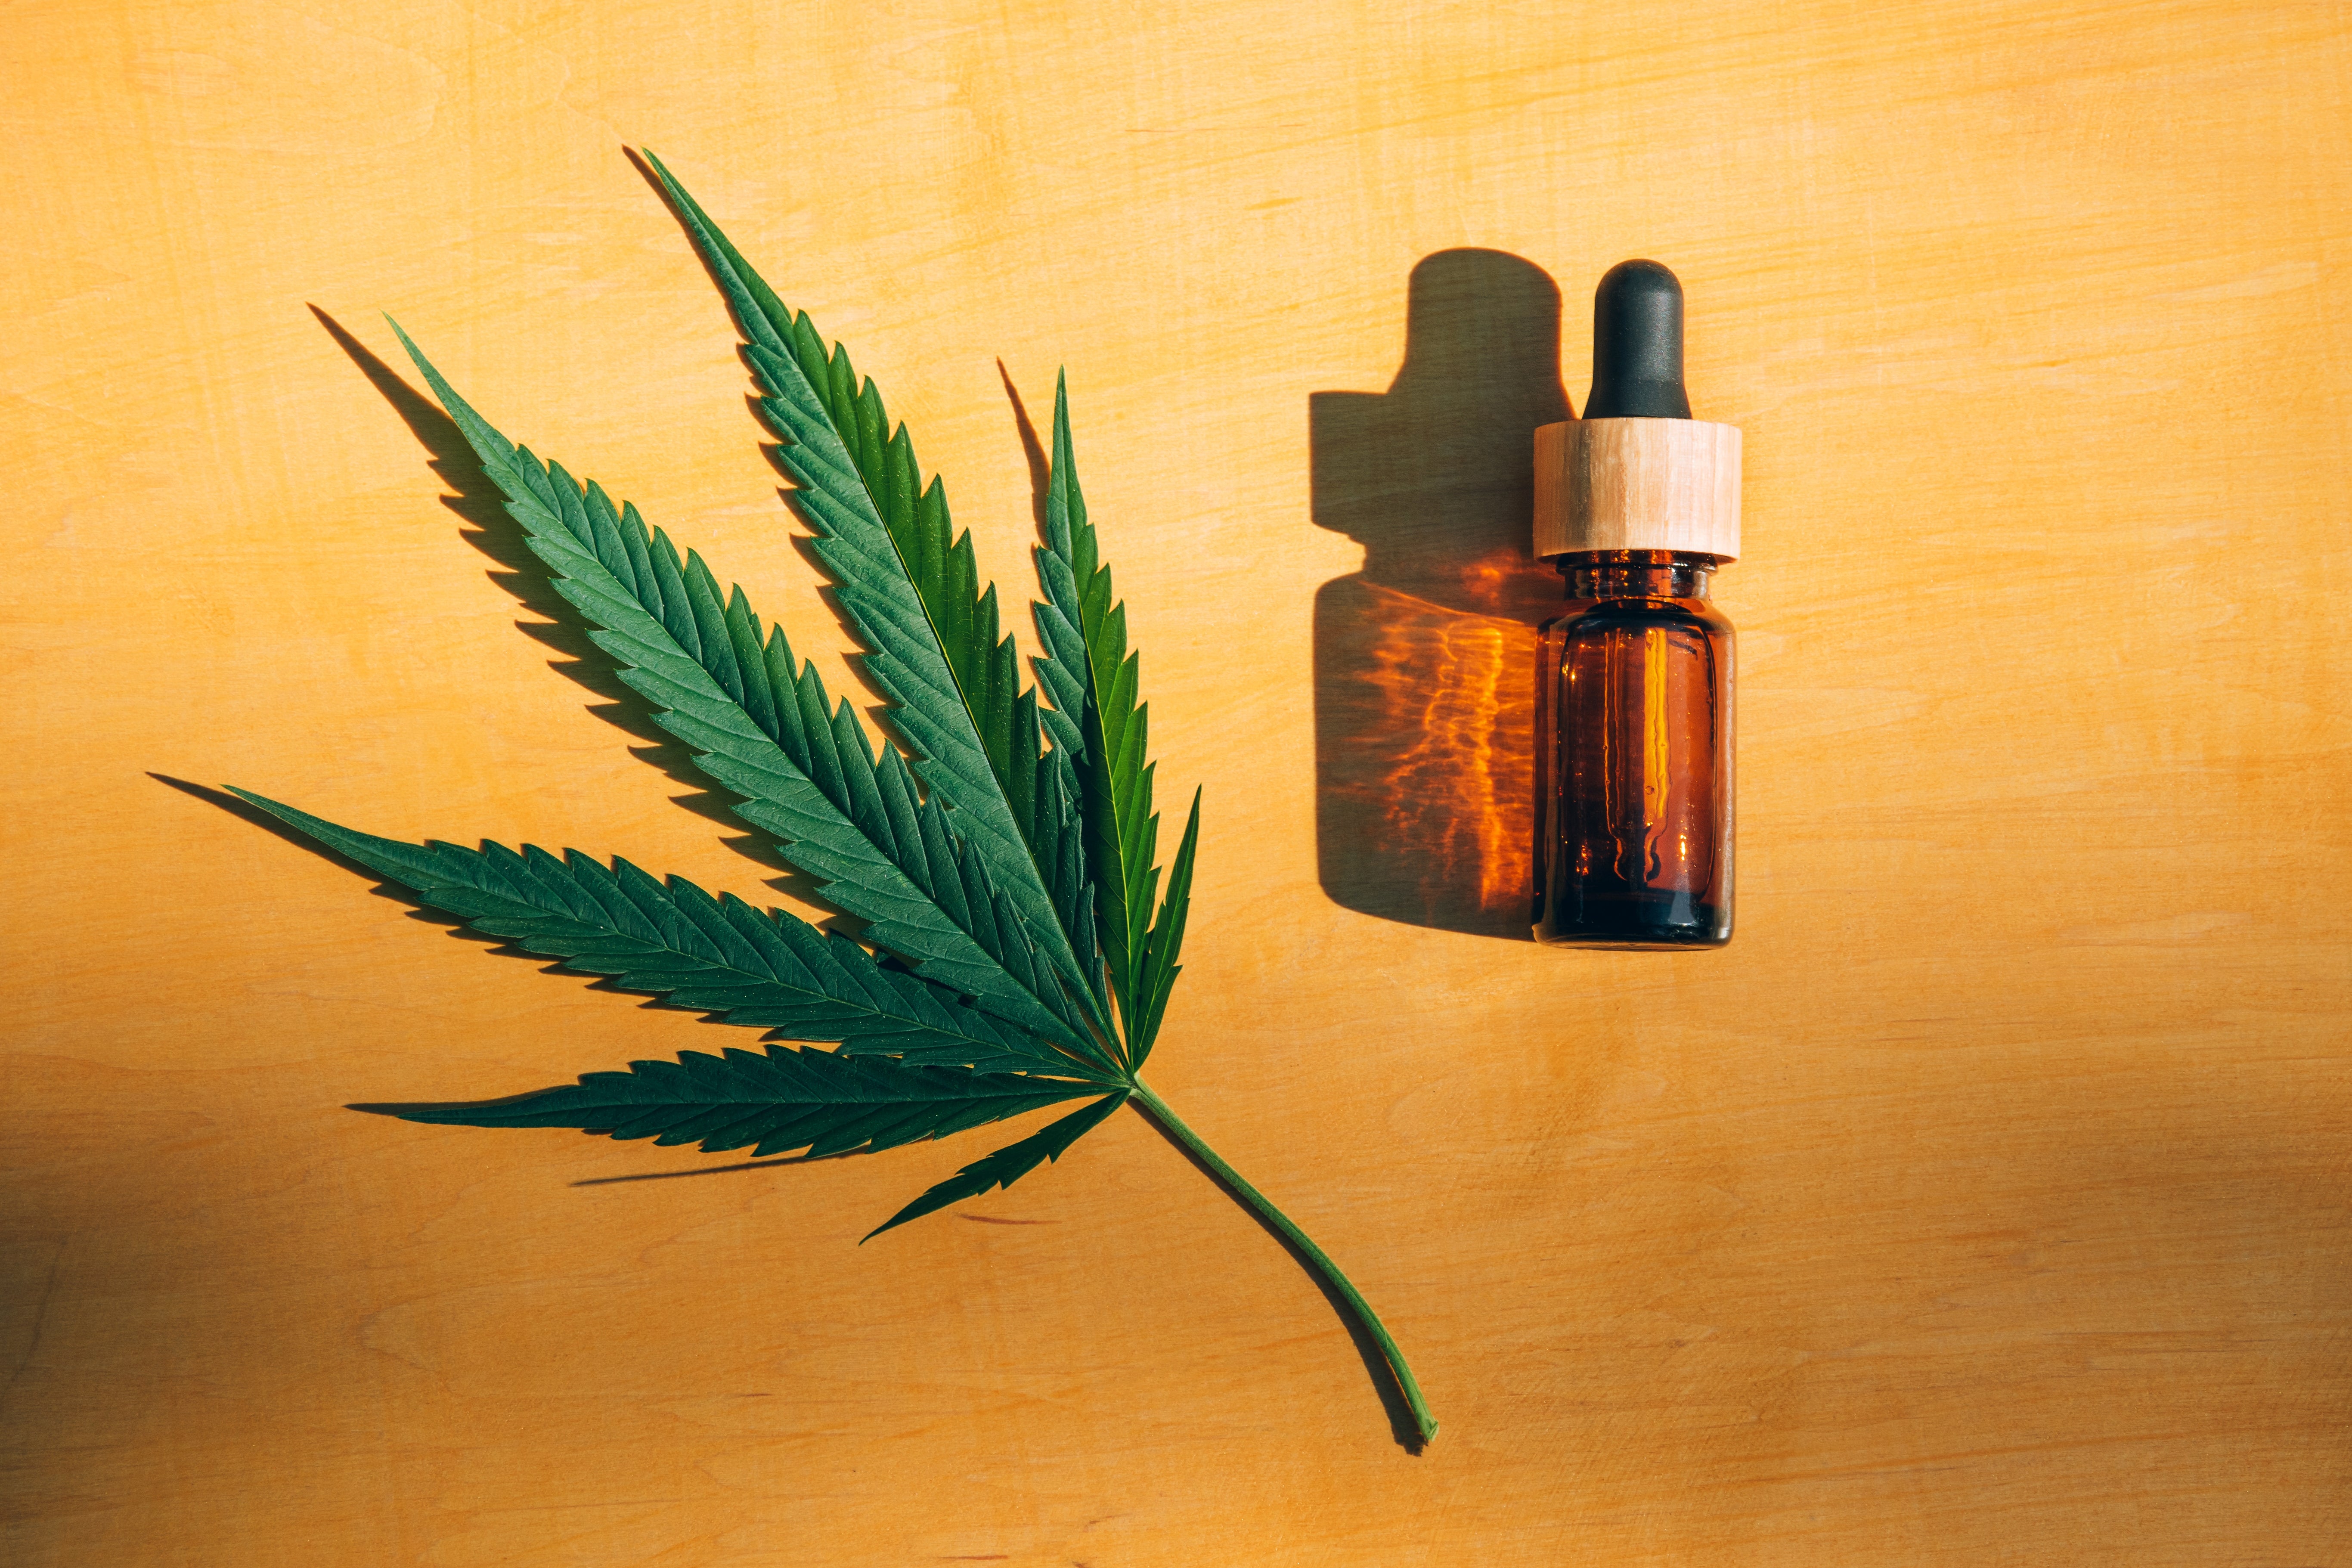 A vial of cannabis oil lies next to a cannabis flower leaf on a wooden surface.